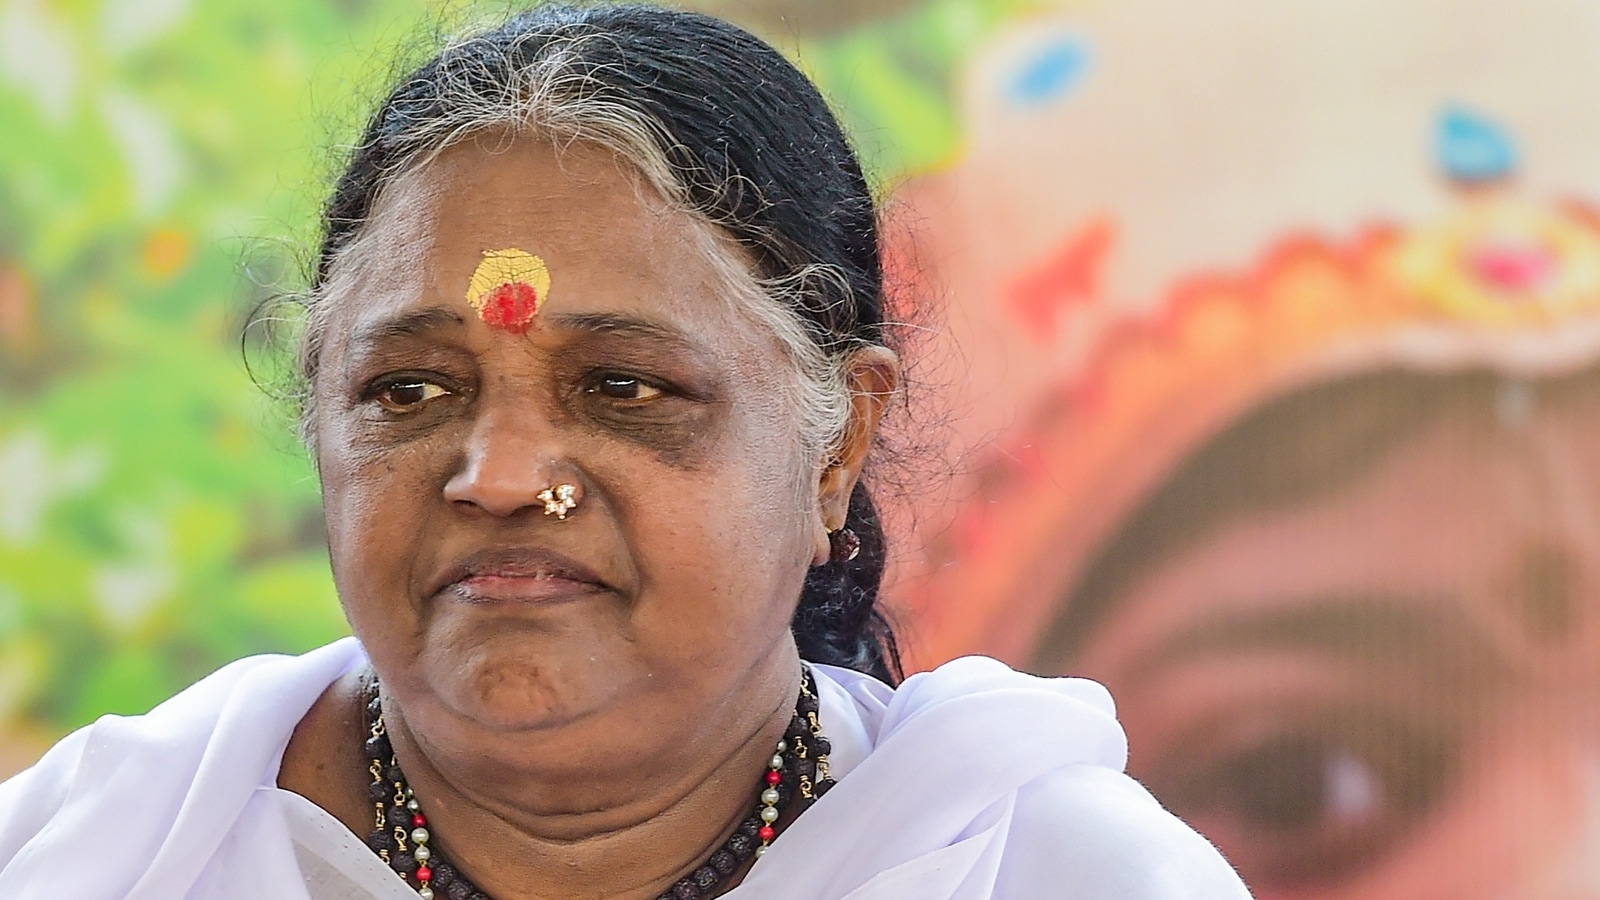 spiritual-leader-amritanandamayi-appointed-chair-of-civil-society-of-g20-summit